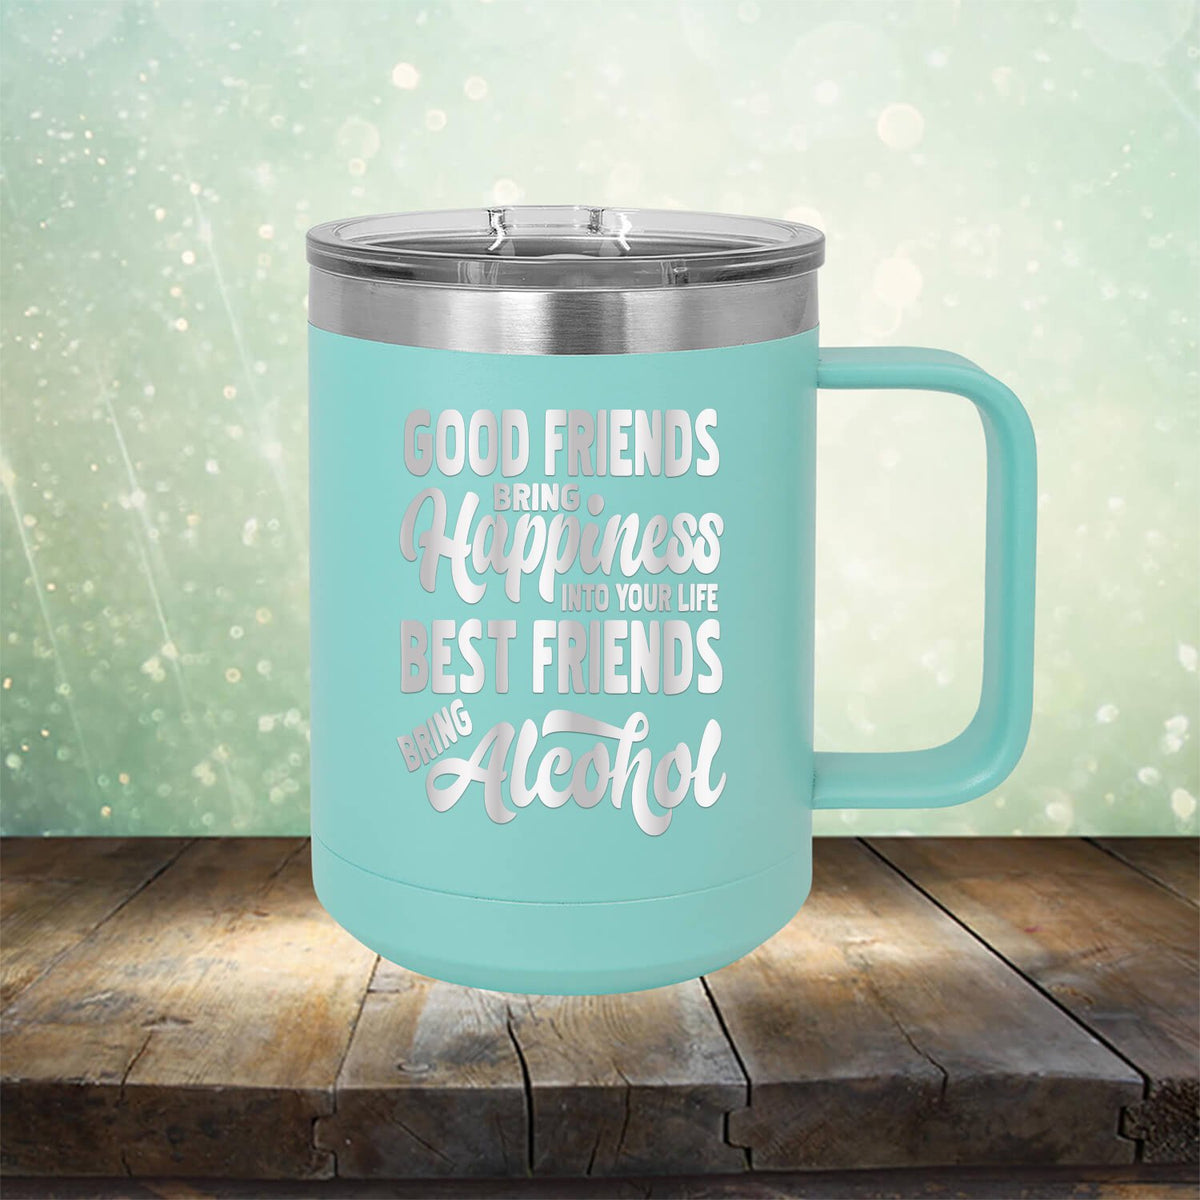 Good Friends Bring Happiness into Your Life Best Friends Bring Alcohol - Laser Etched Tumbler Mug